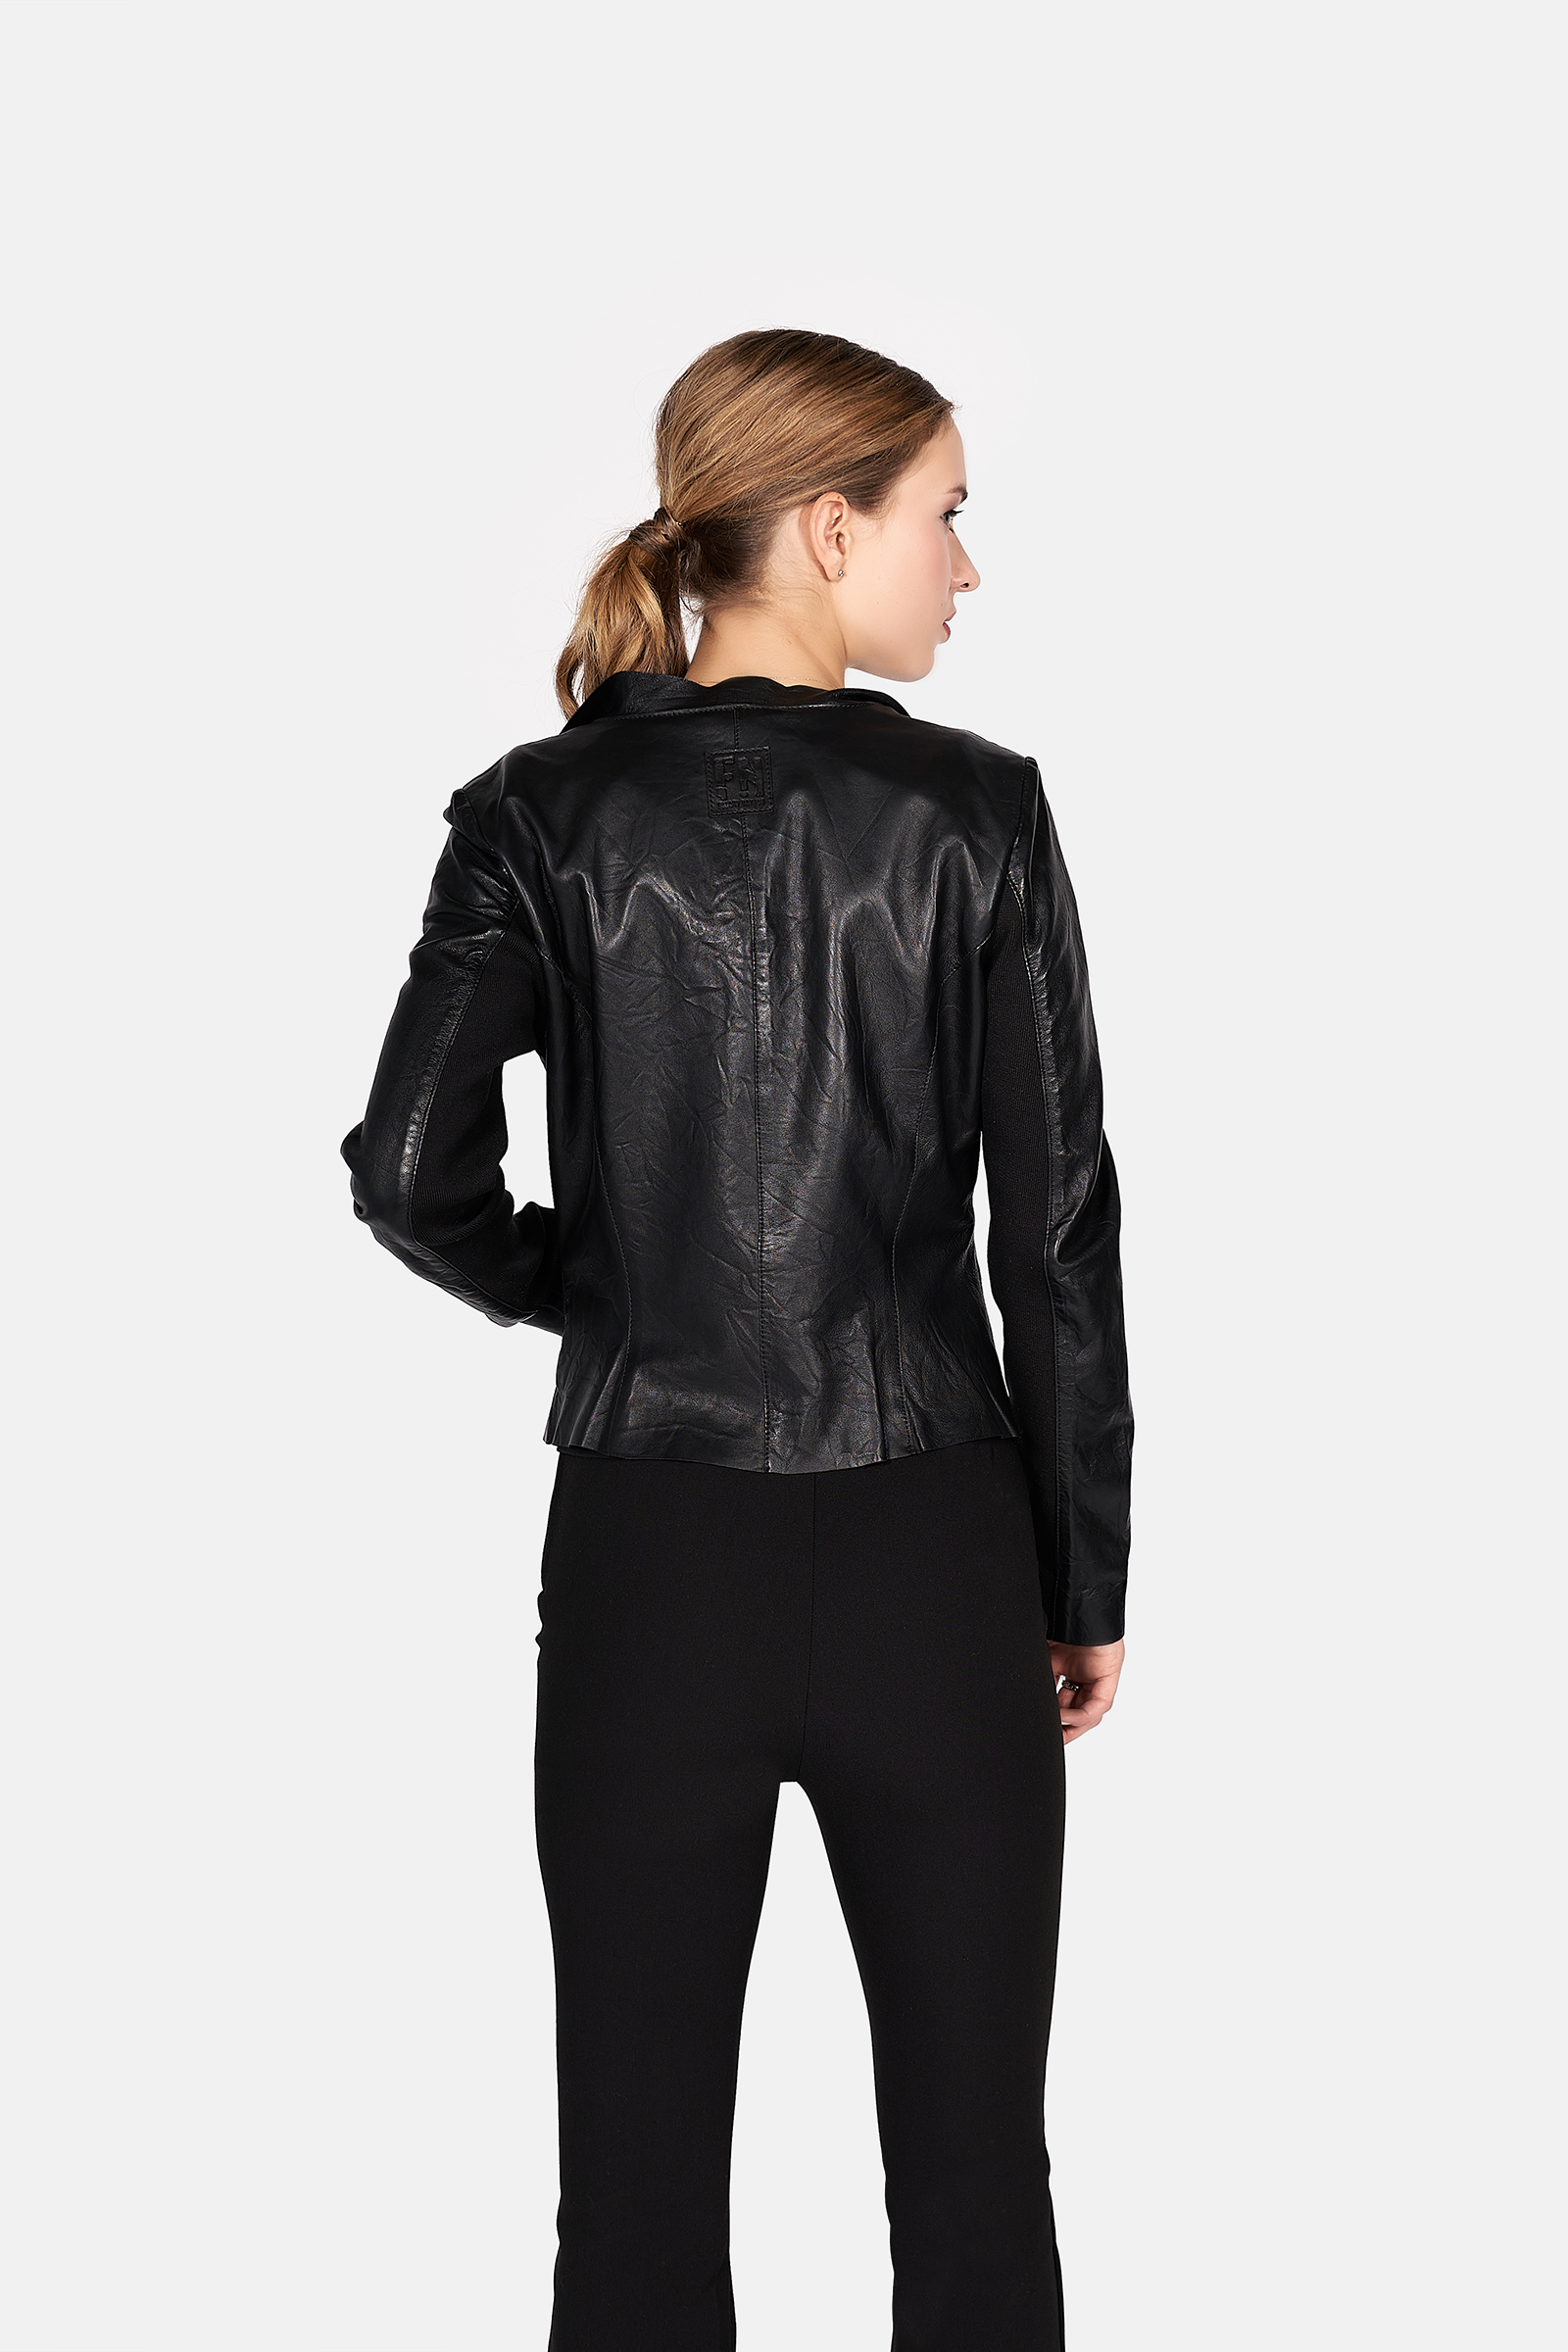 Jackets Women Leather up | | Nation Blow Freaky | 1-FN New